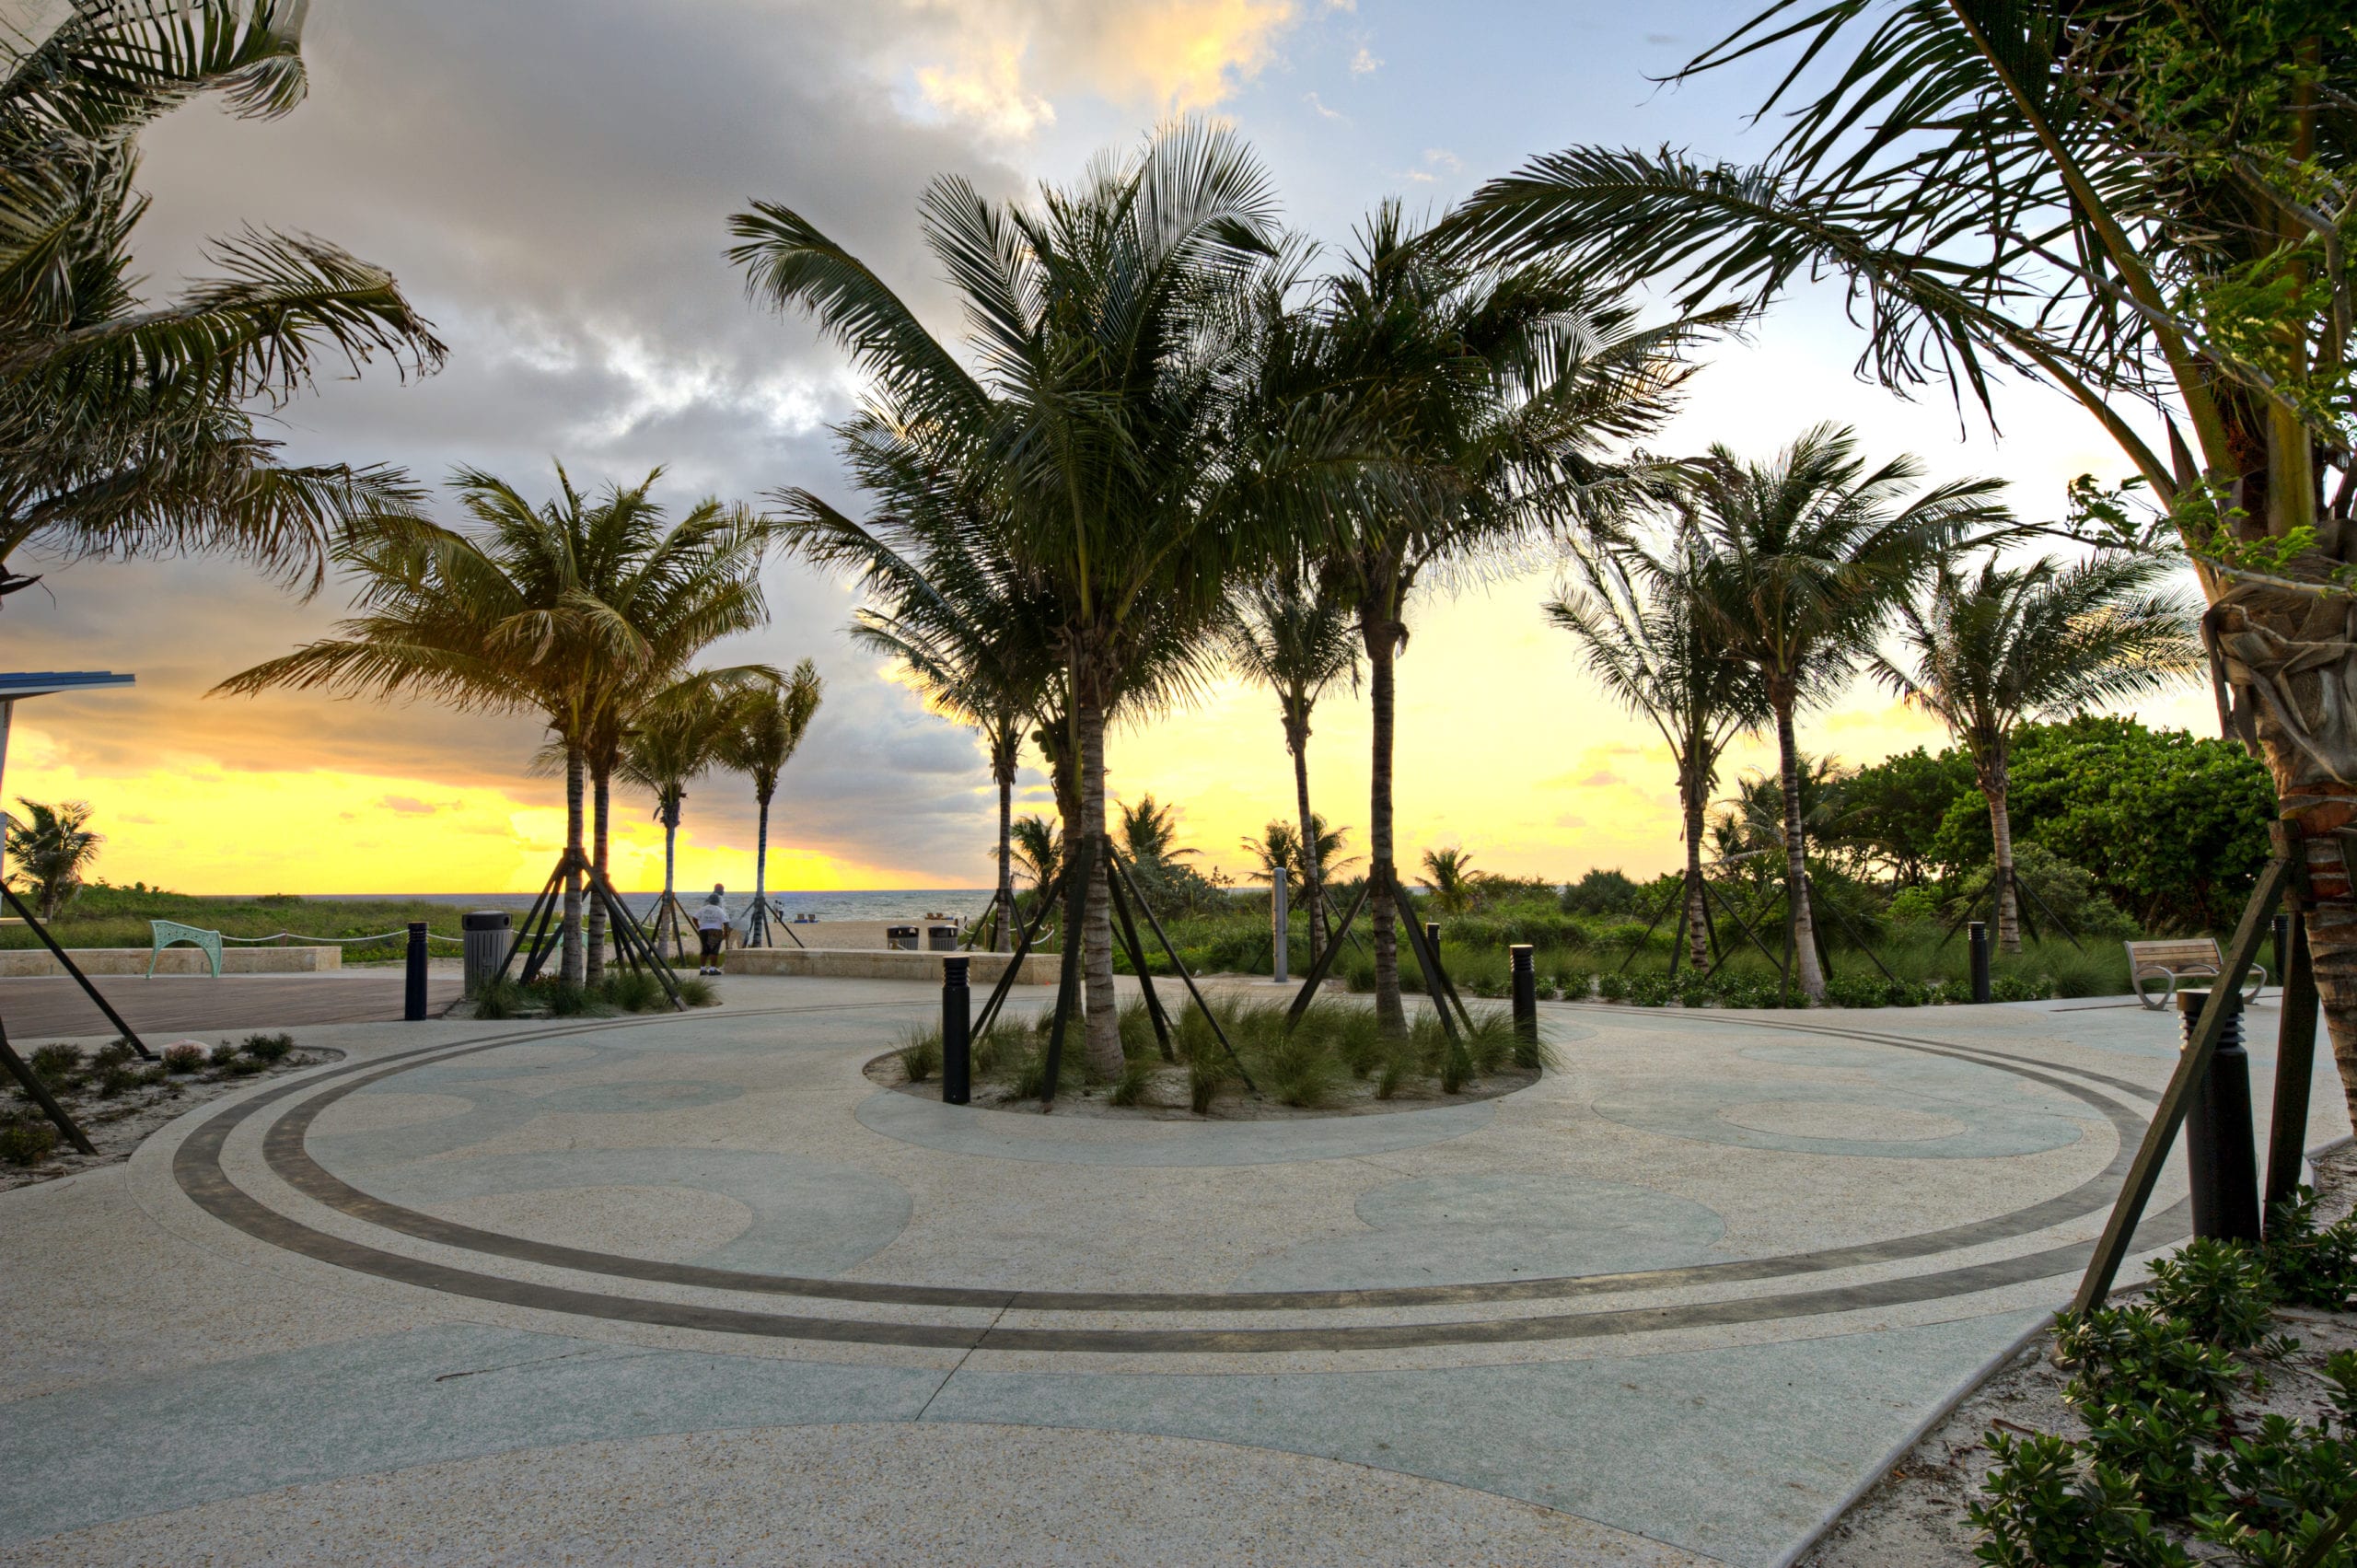 EDSA Pompano Beach Boulevard grounds with palm trees with the beach in the background at dusk